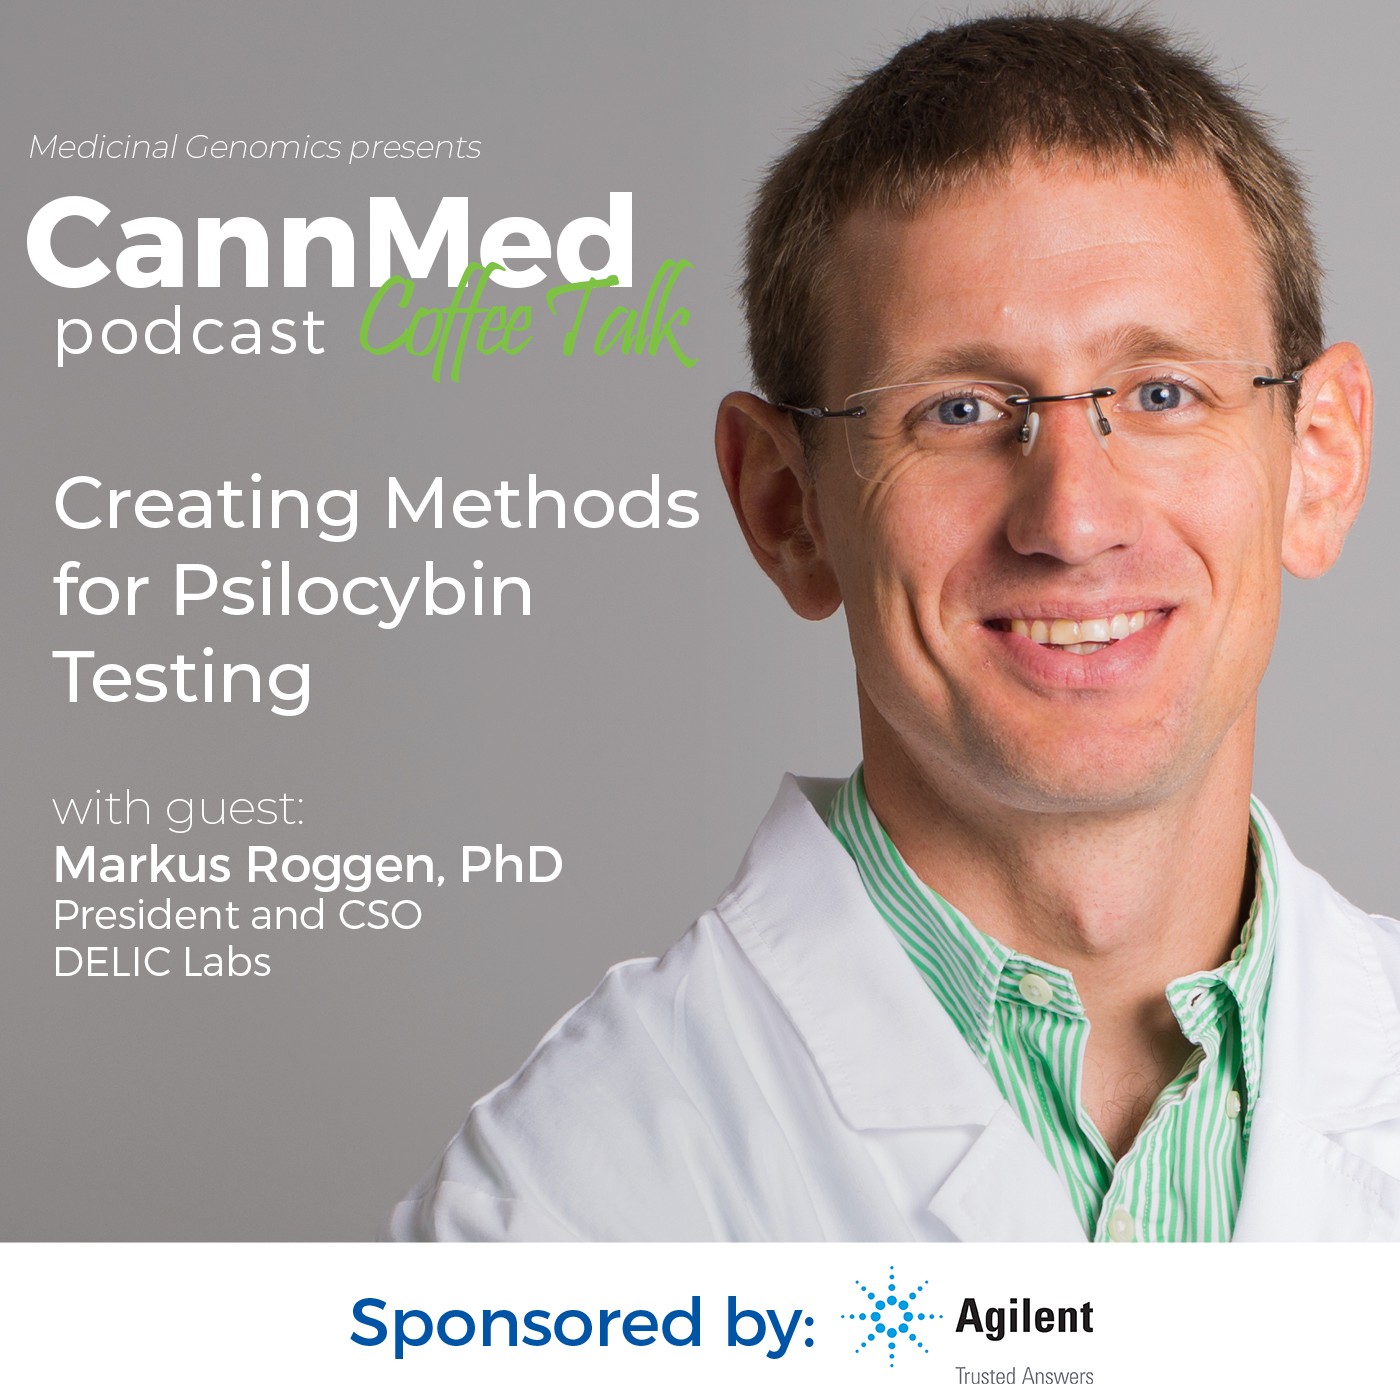 Featured image for “Creating Methods  for Psilocybin Testing  with Markus Roggen, PhD”